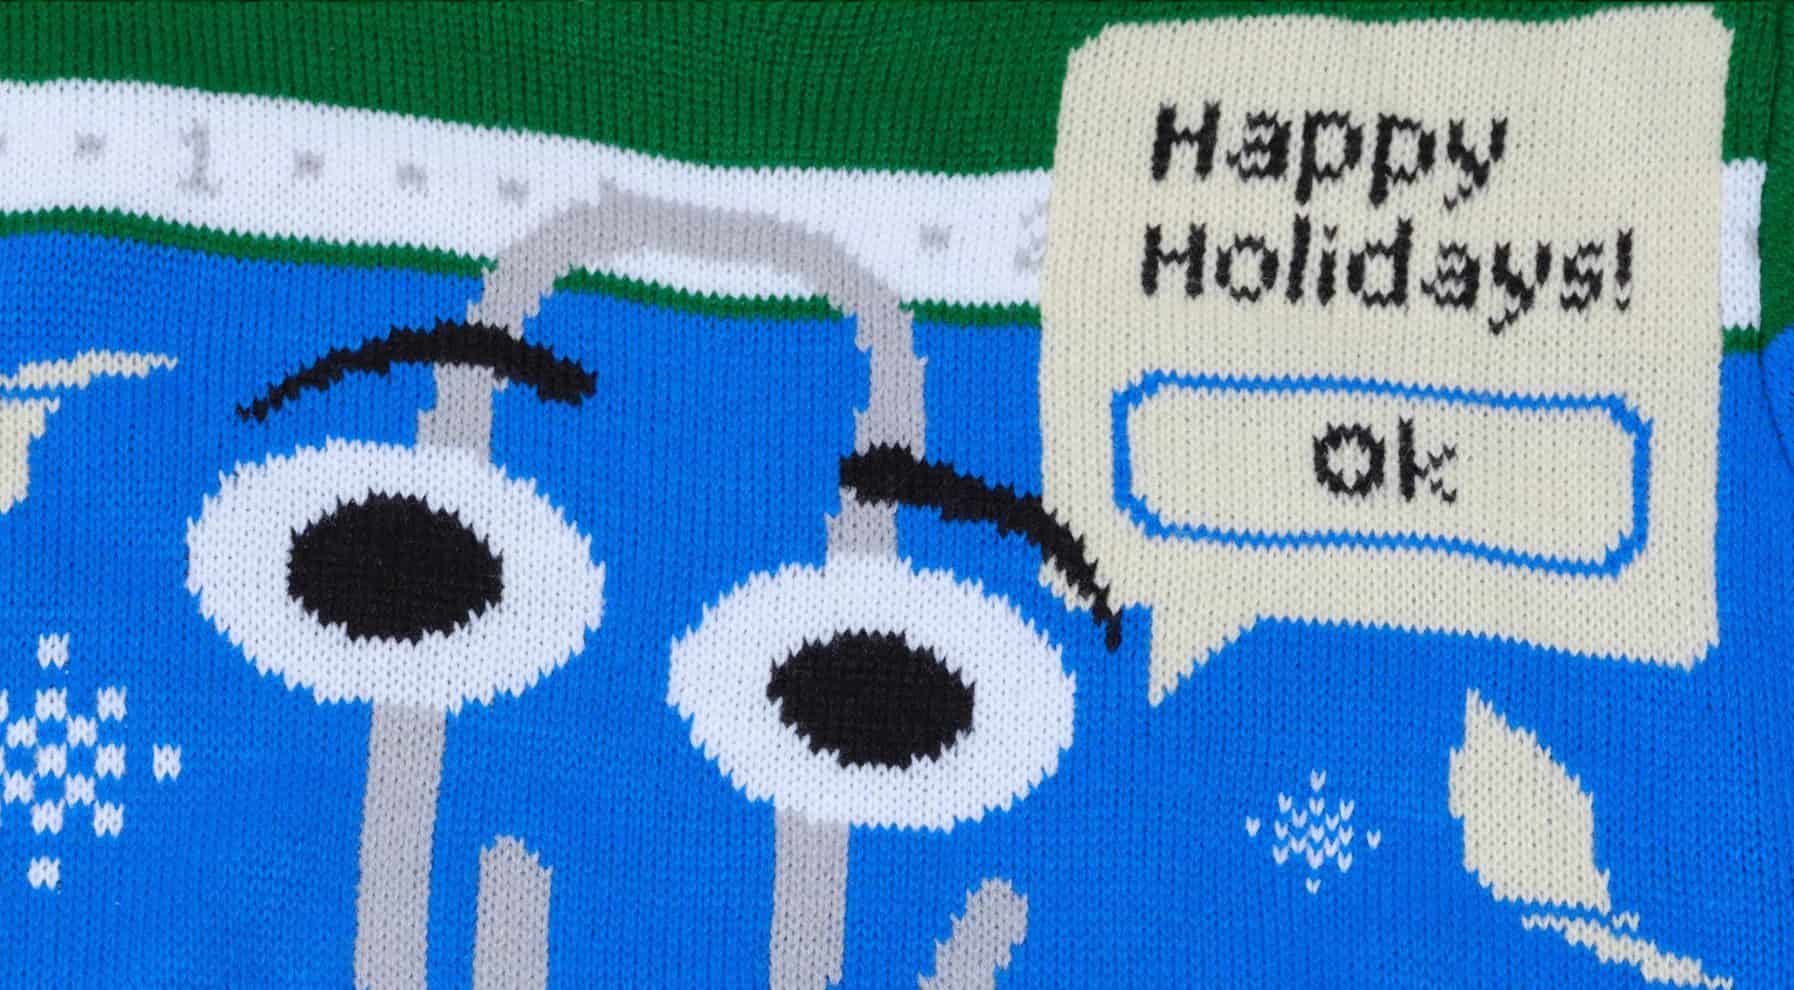 Microsoft’s 2022 ugly sweater is here and it features Clippy